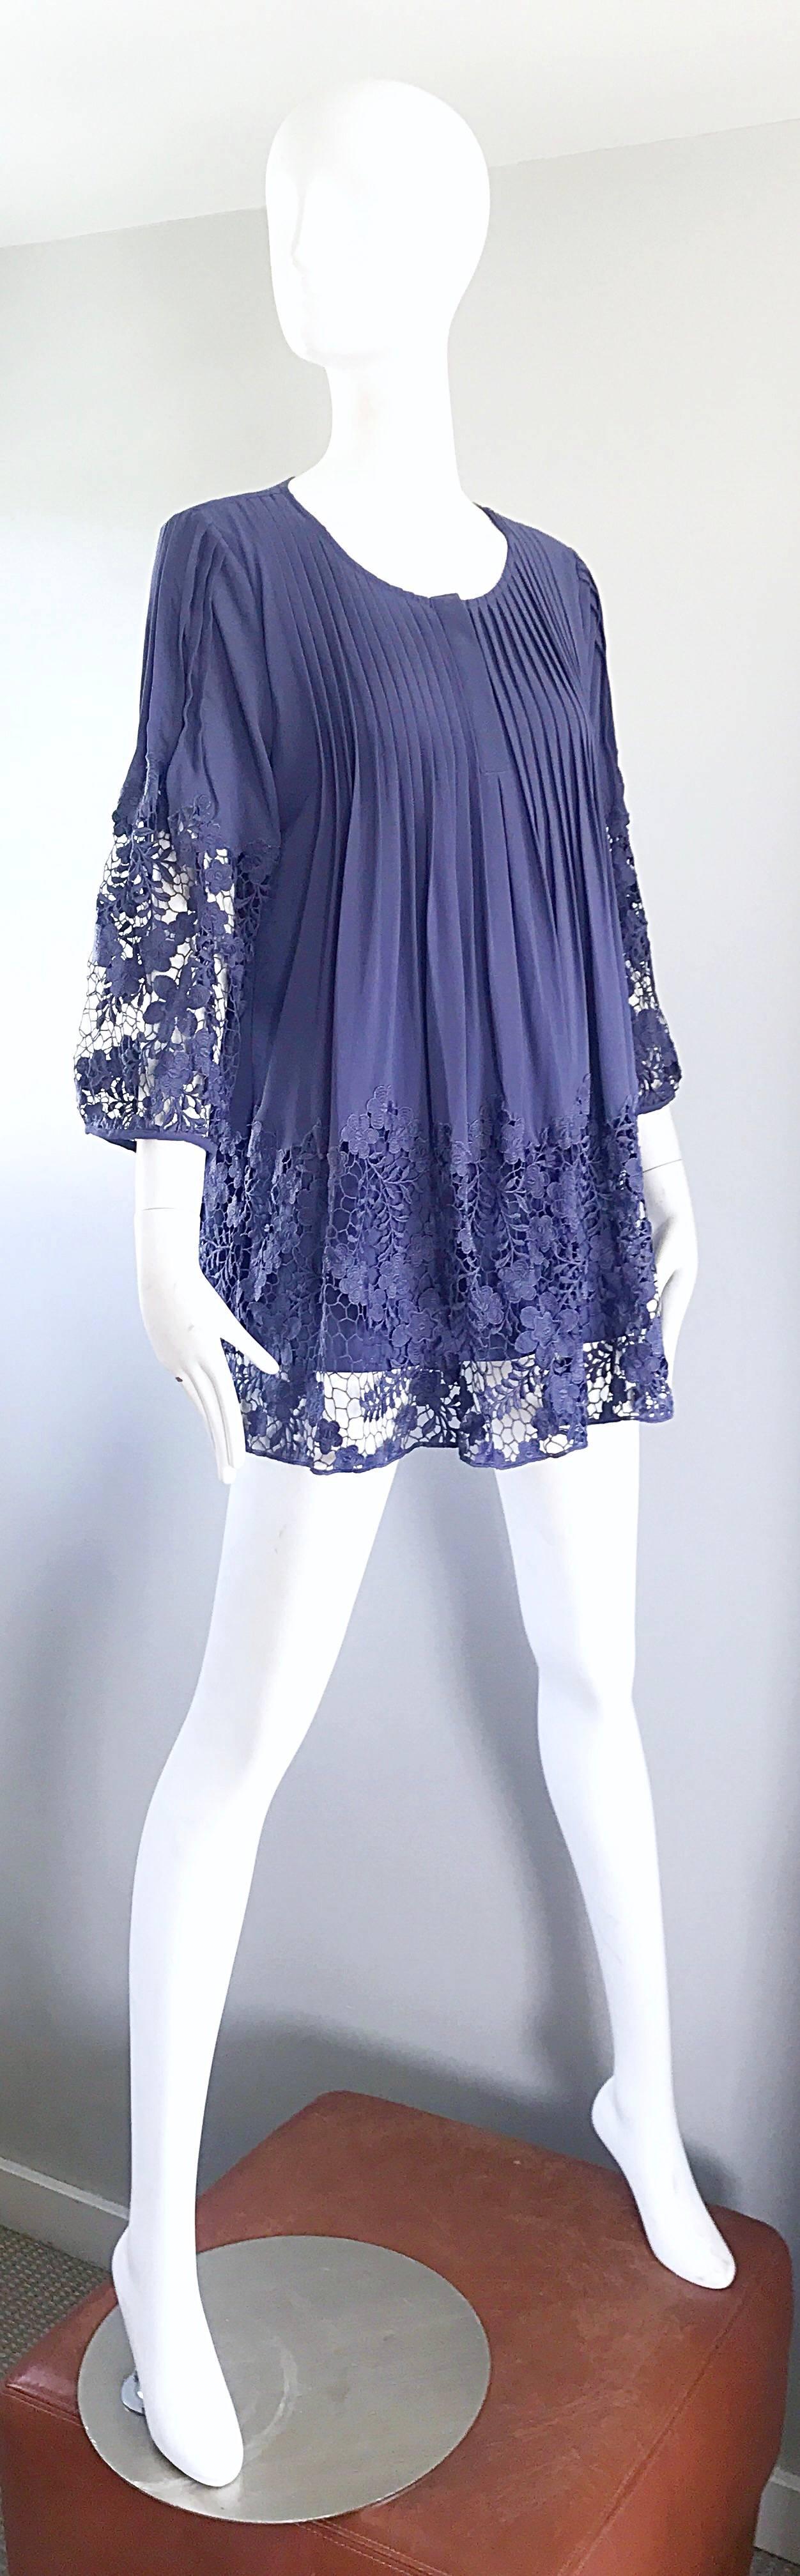 Enzo Gevonni Vintage Perwinkle Purple Crochet Babydoll Vintage Mini Dress Tunic In Excellent Condition For Sale In San Diego, CA